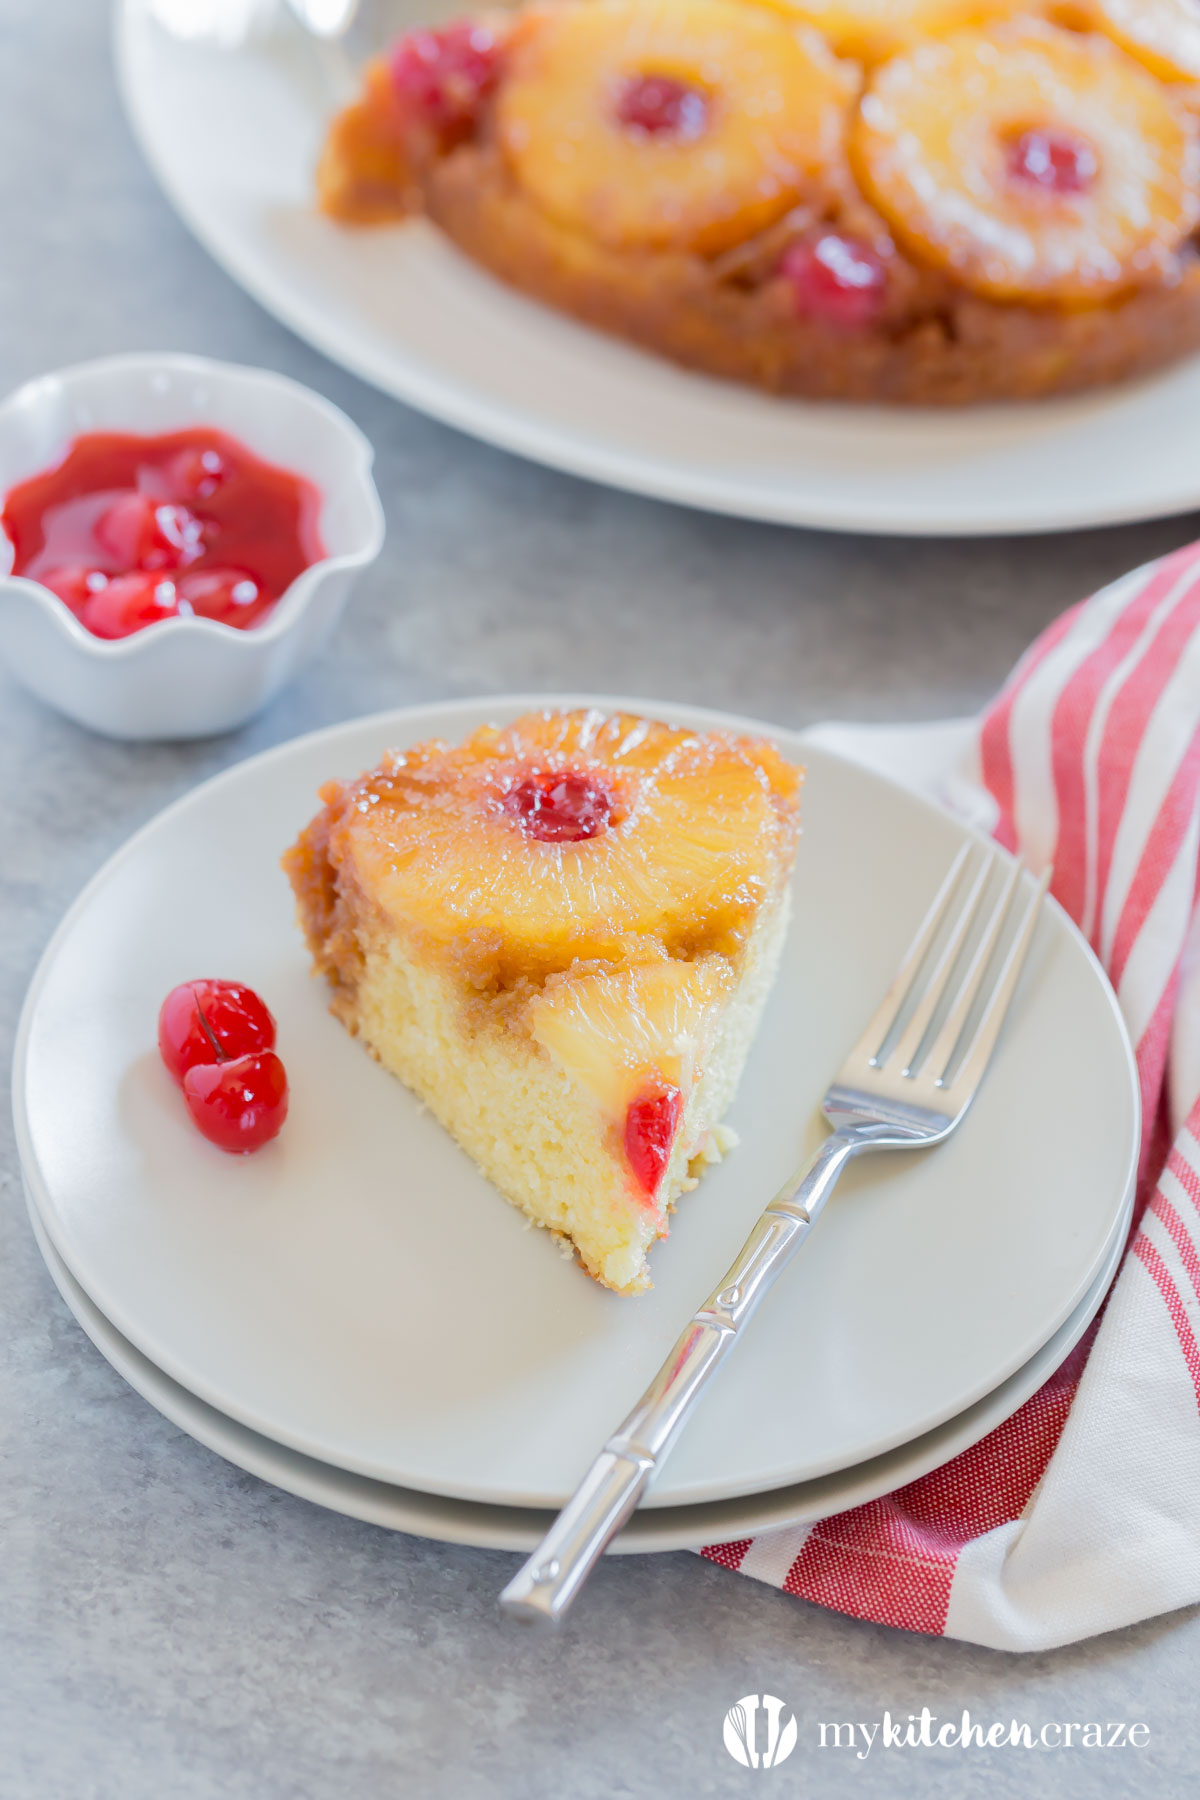 Pineapple Upside Down Cake is one of the best cakes I've ever eaten! It's moist, delicious and all homemade! No cake box needed in this recipe. This cake is screaming make me!